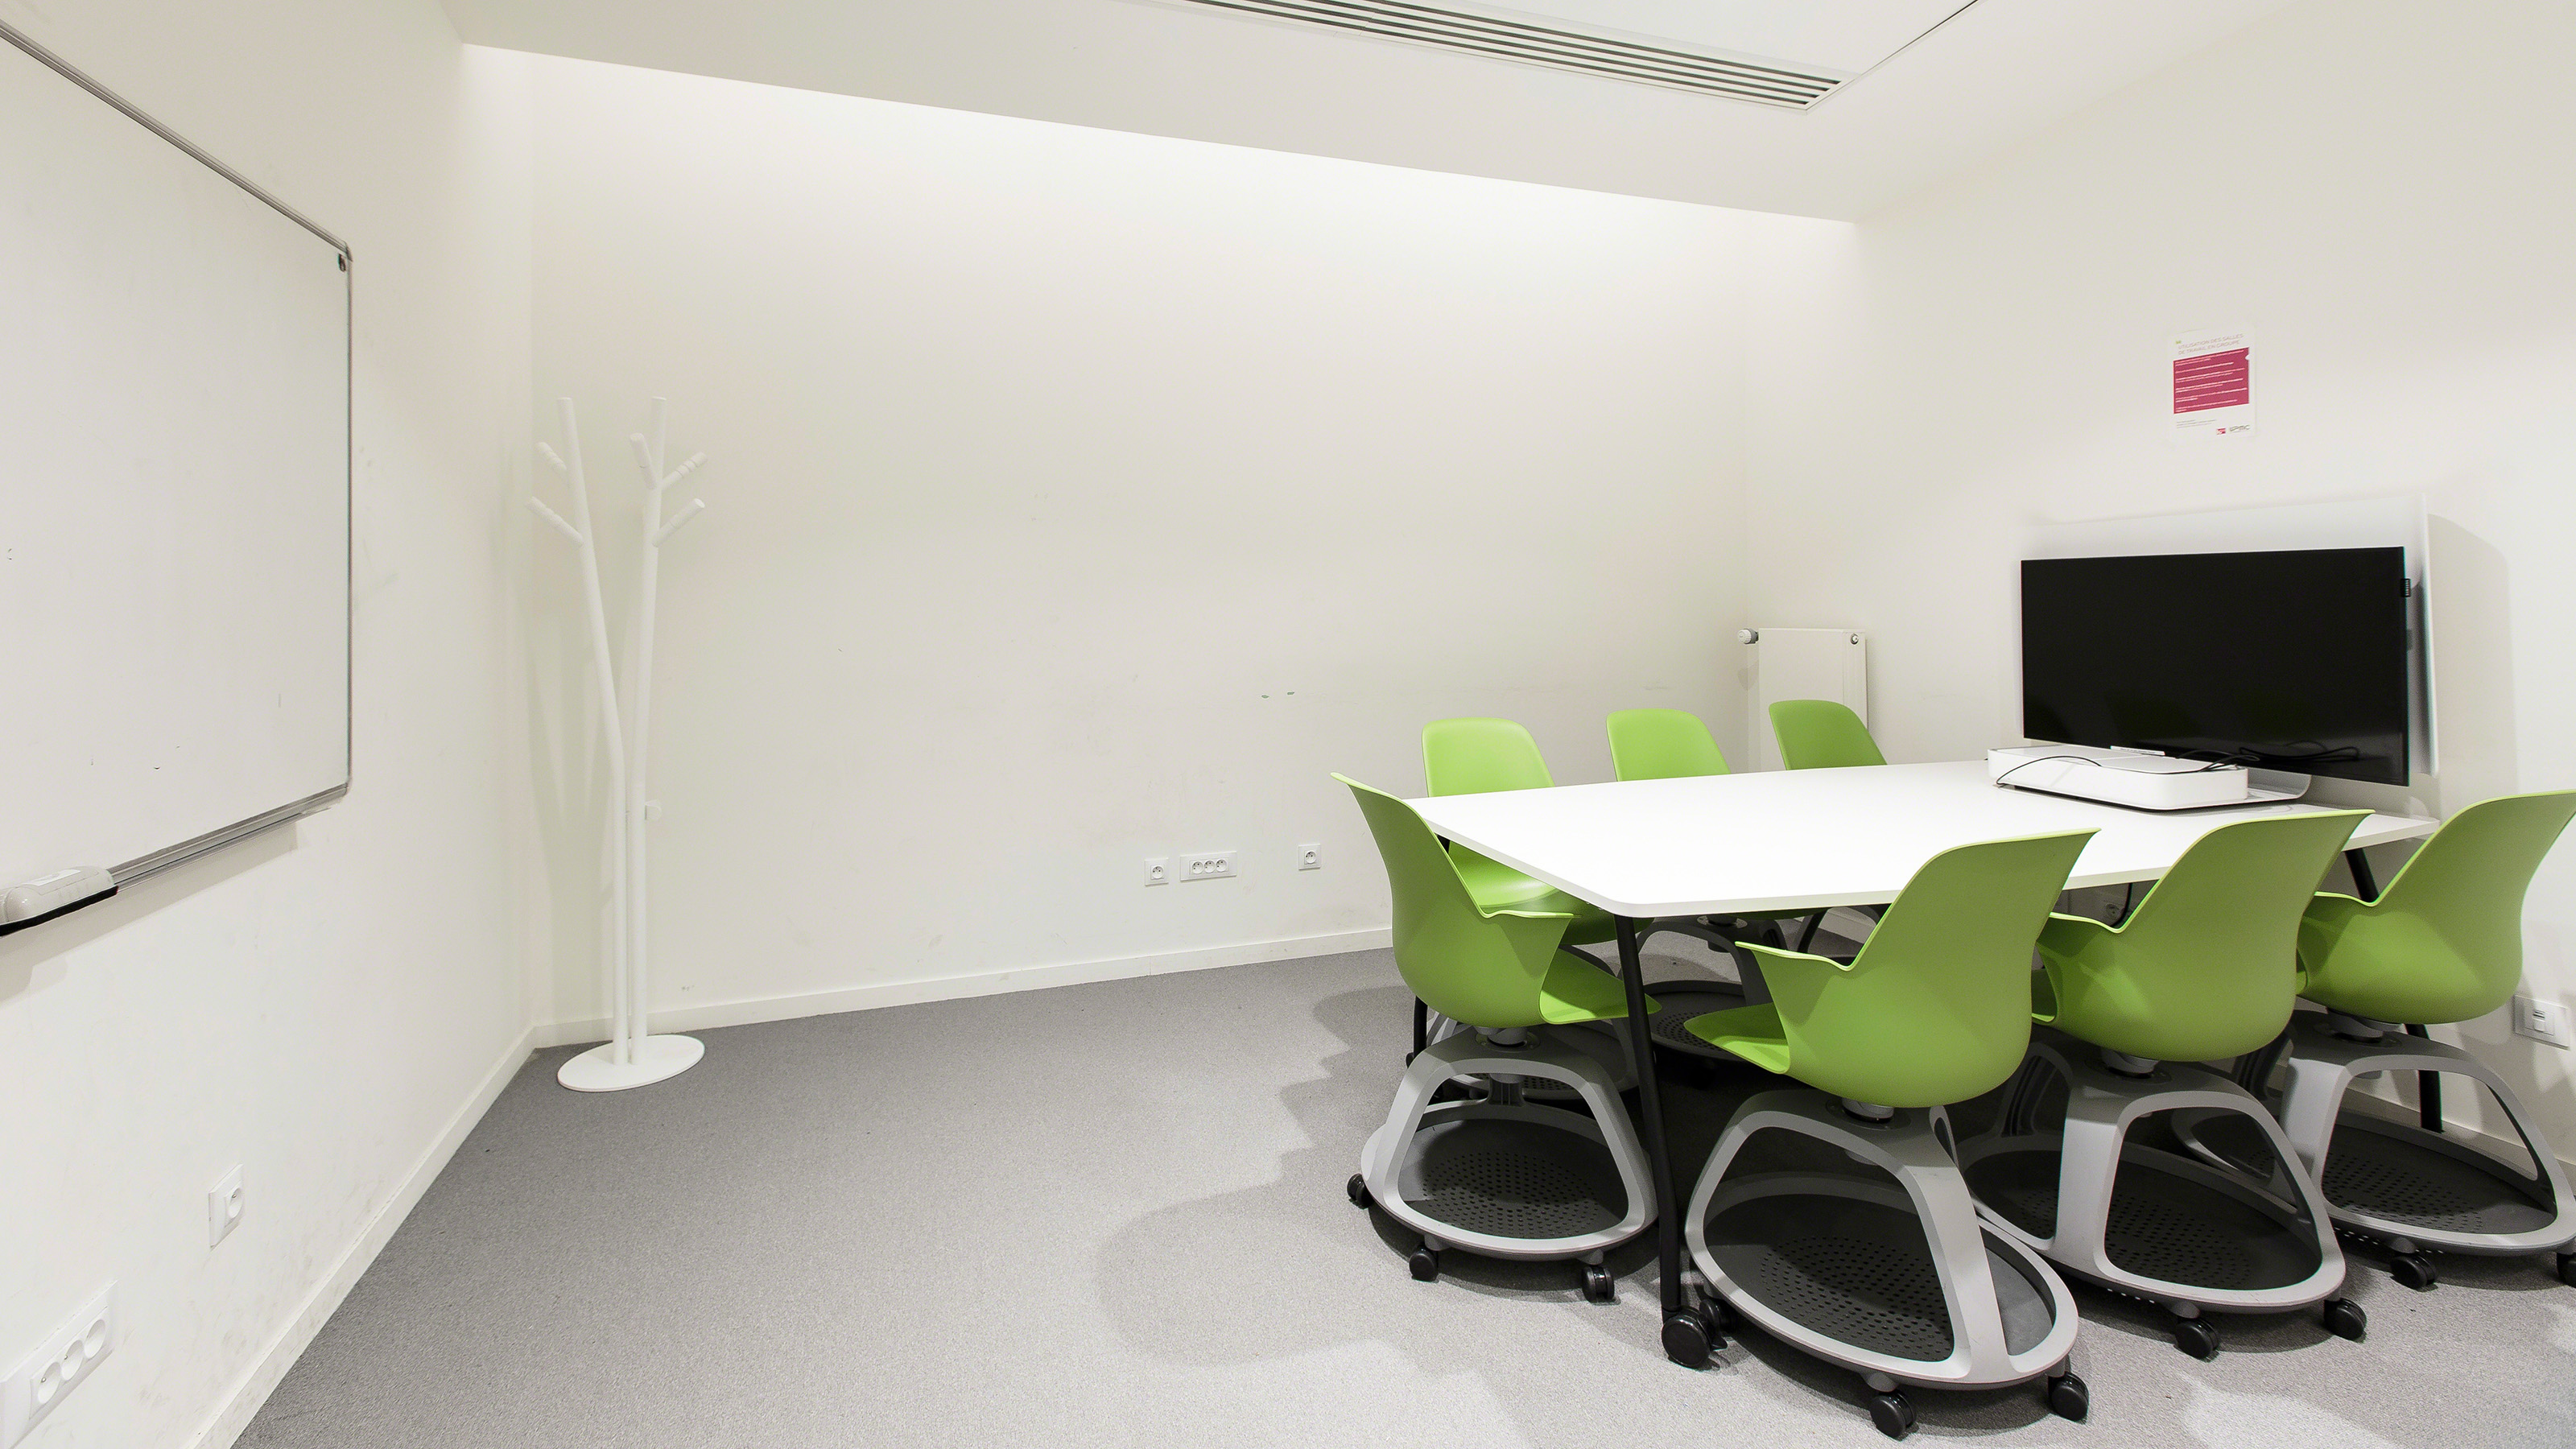 small conference room with green chairs arranged at a table with a screen at one end and a whiteboard on the opposite wall